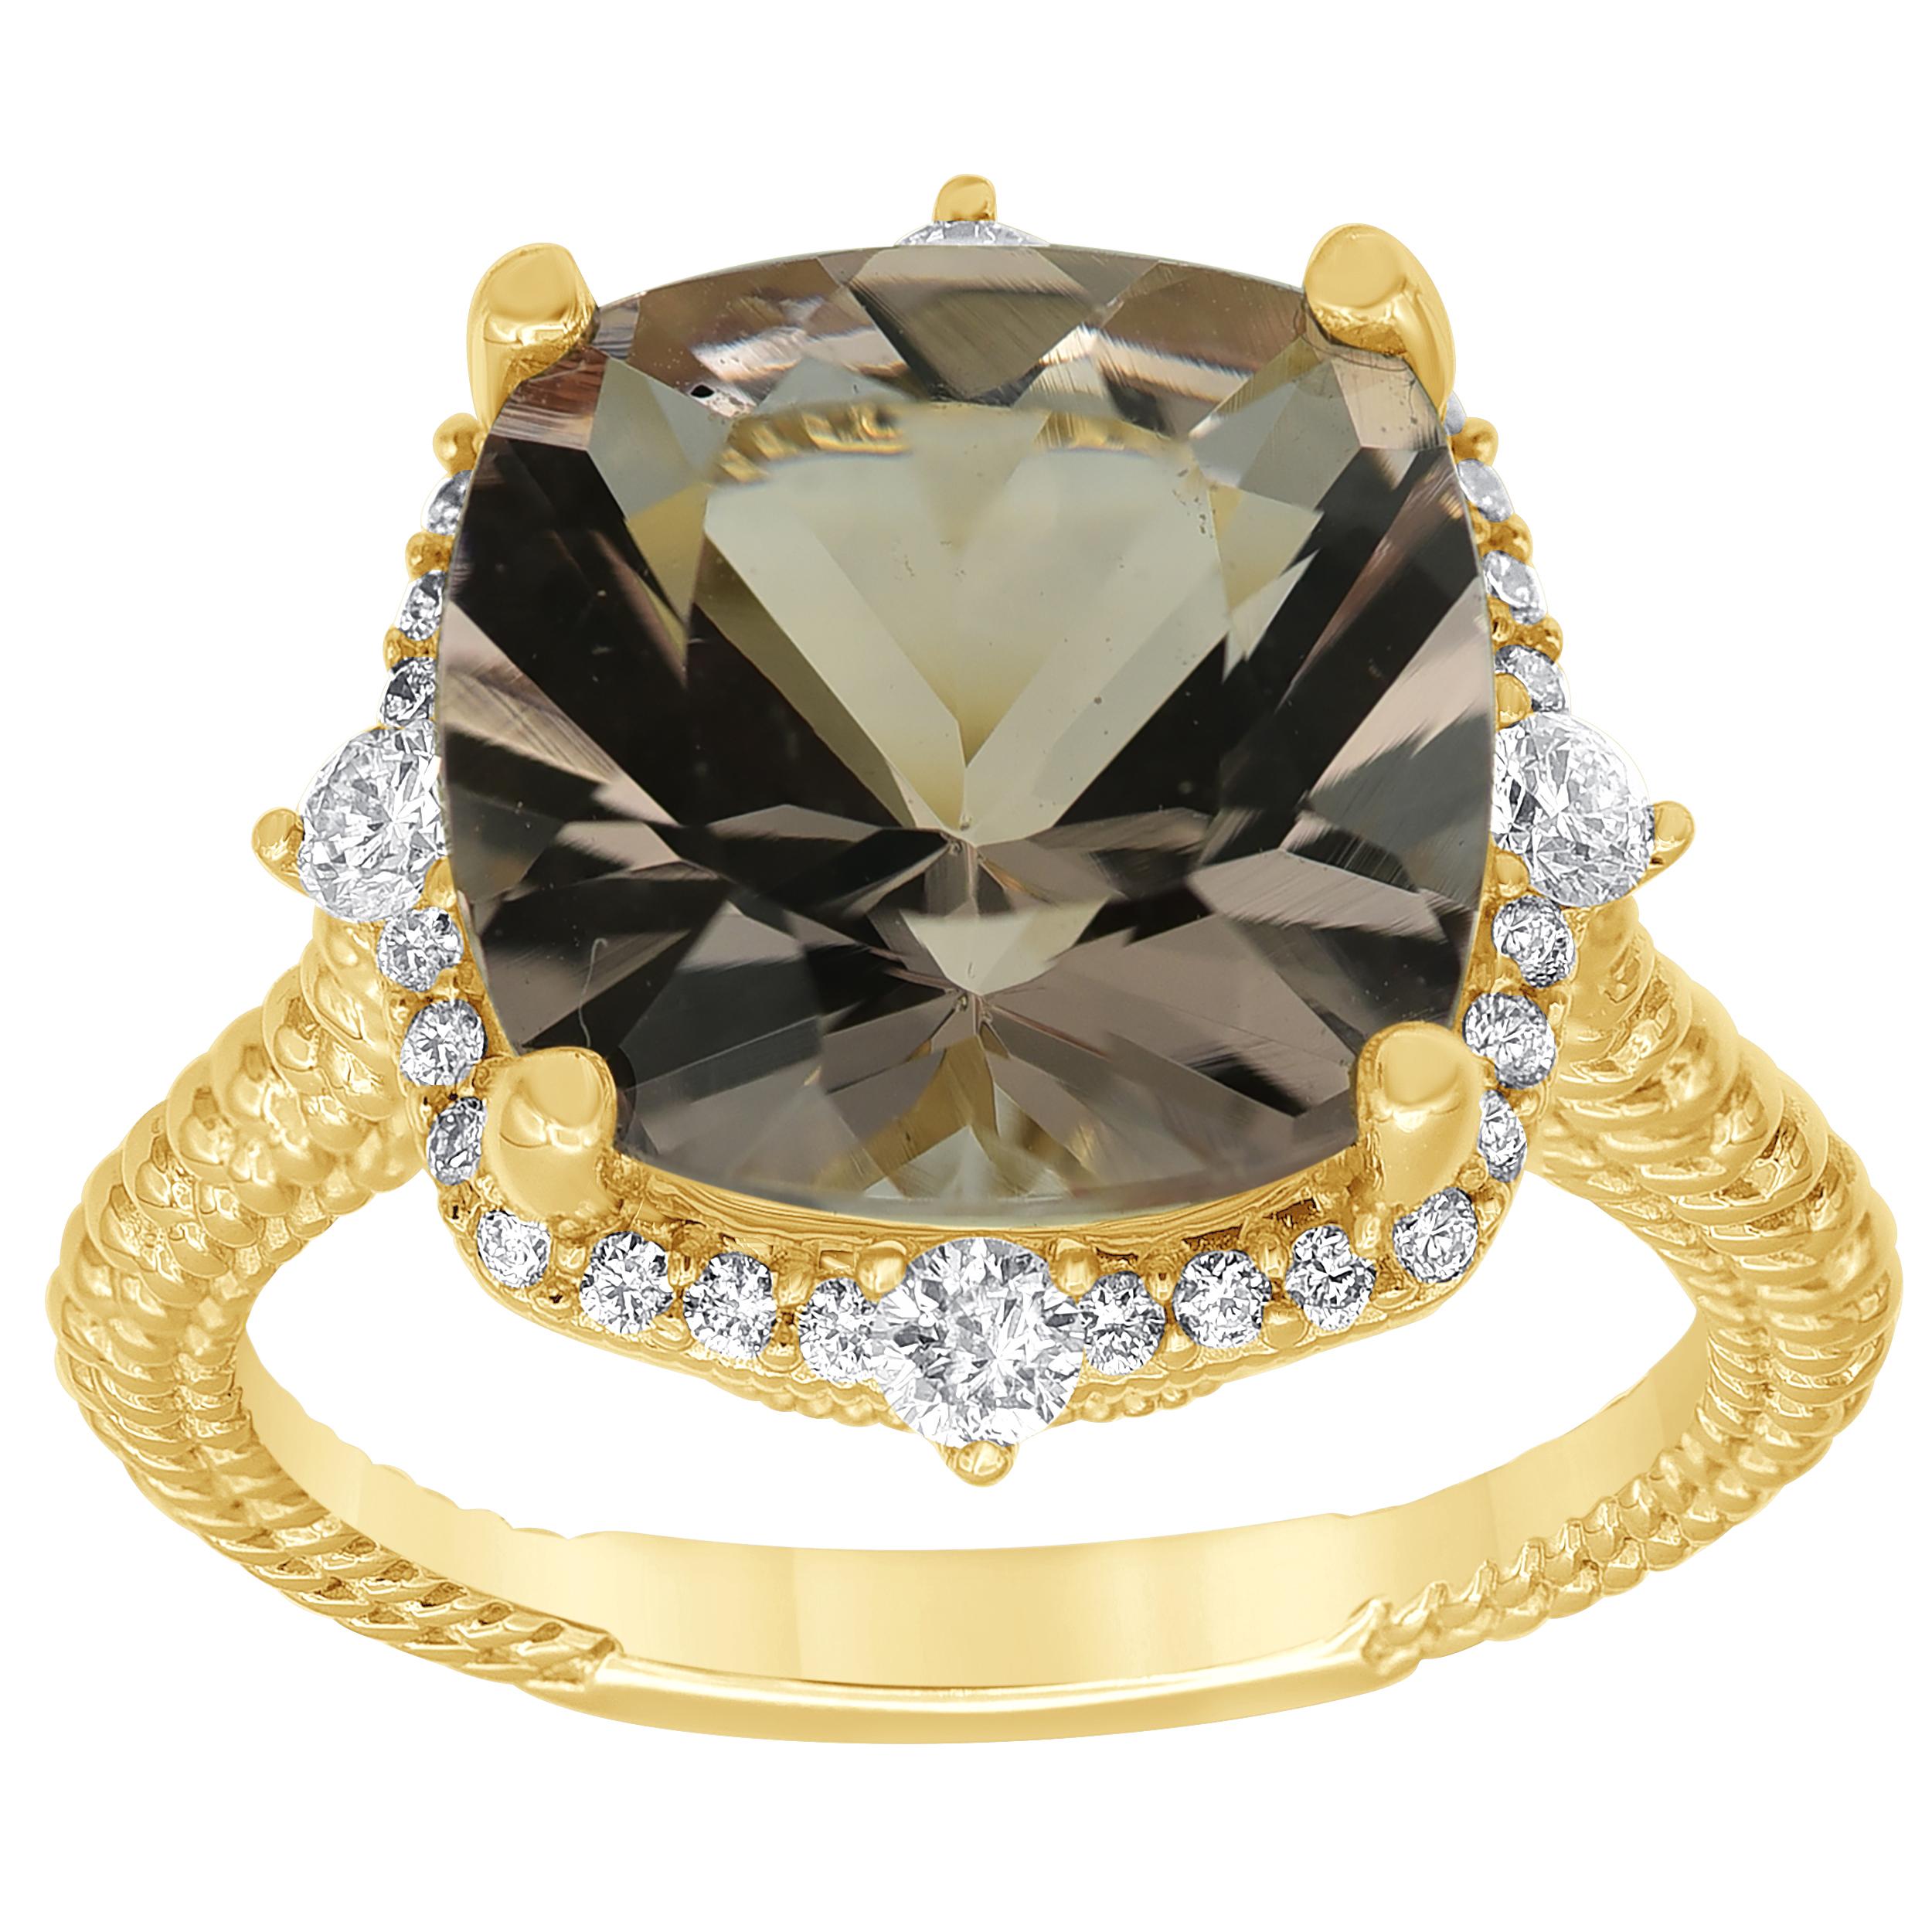 She'll be all smiles when you gift her with this gorgeous gemstone ring. Crafted in warm 14K yellow gold, this luxe style showcases cushion-cut deep smoky quartz wrapped in a sun-style frame of shimmering diamond accents. Buffed to a brilliant